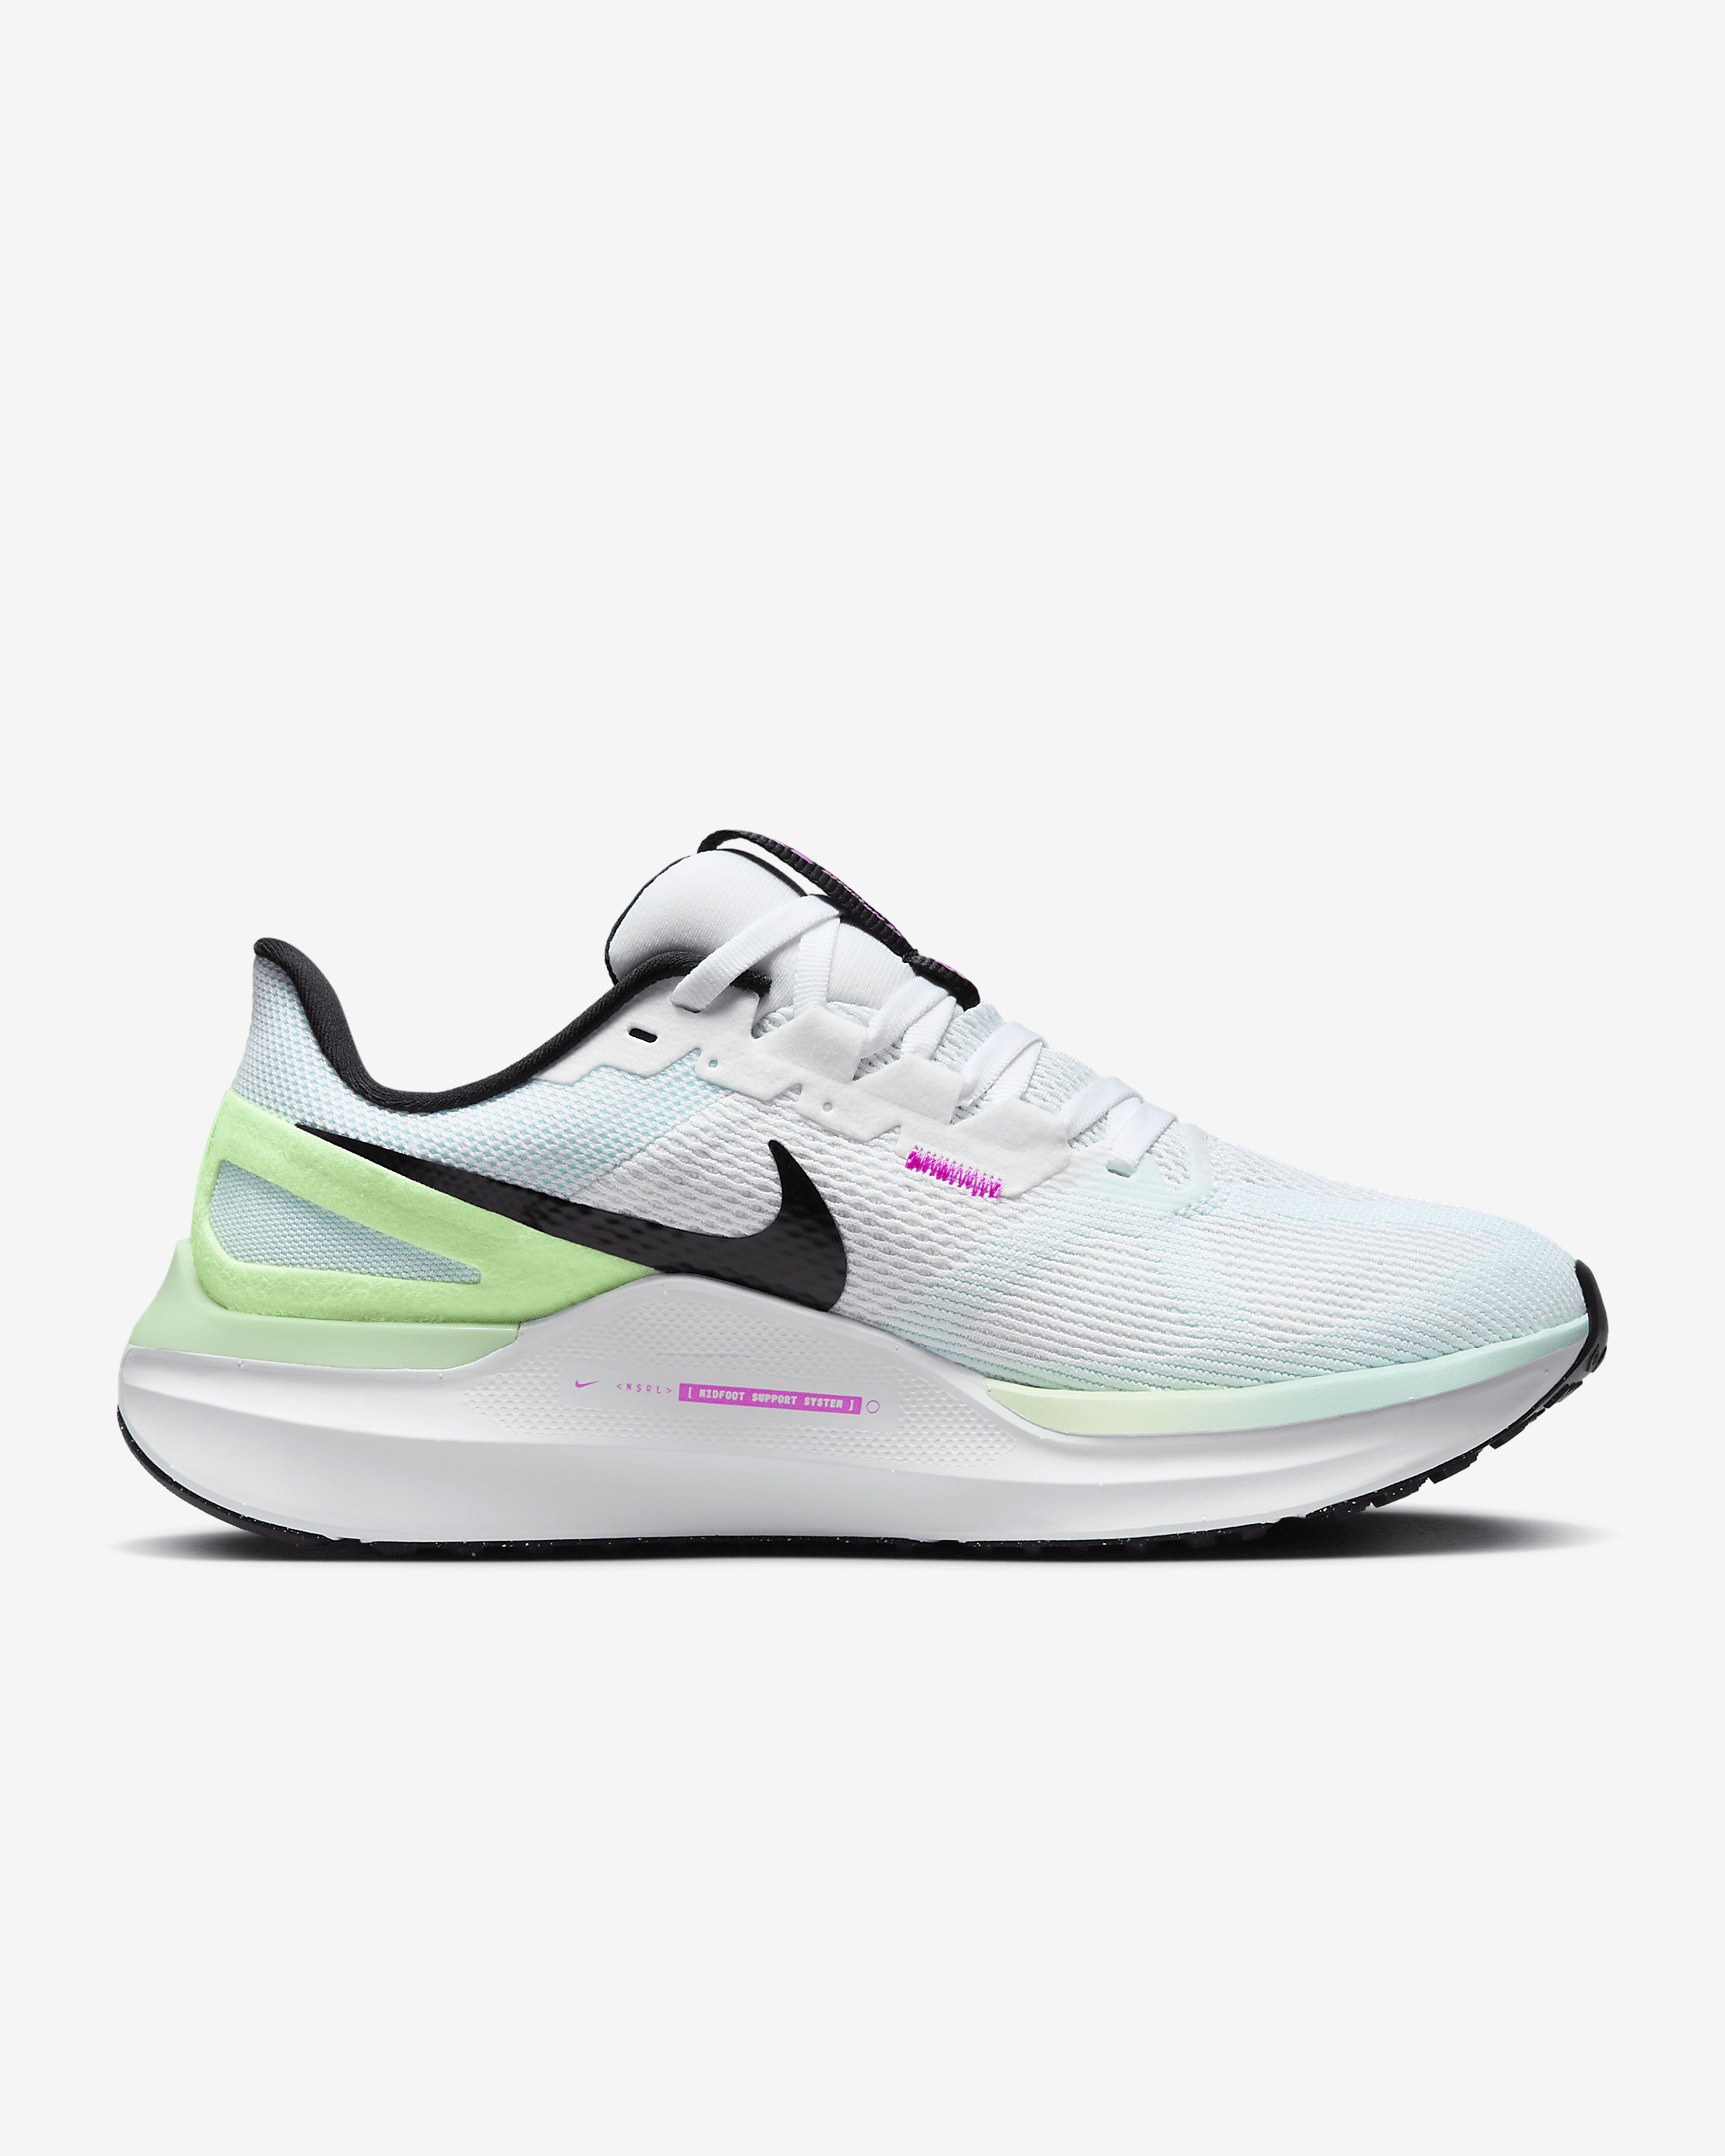 Nike Women's Structure 25 Road Running Shoes - 3